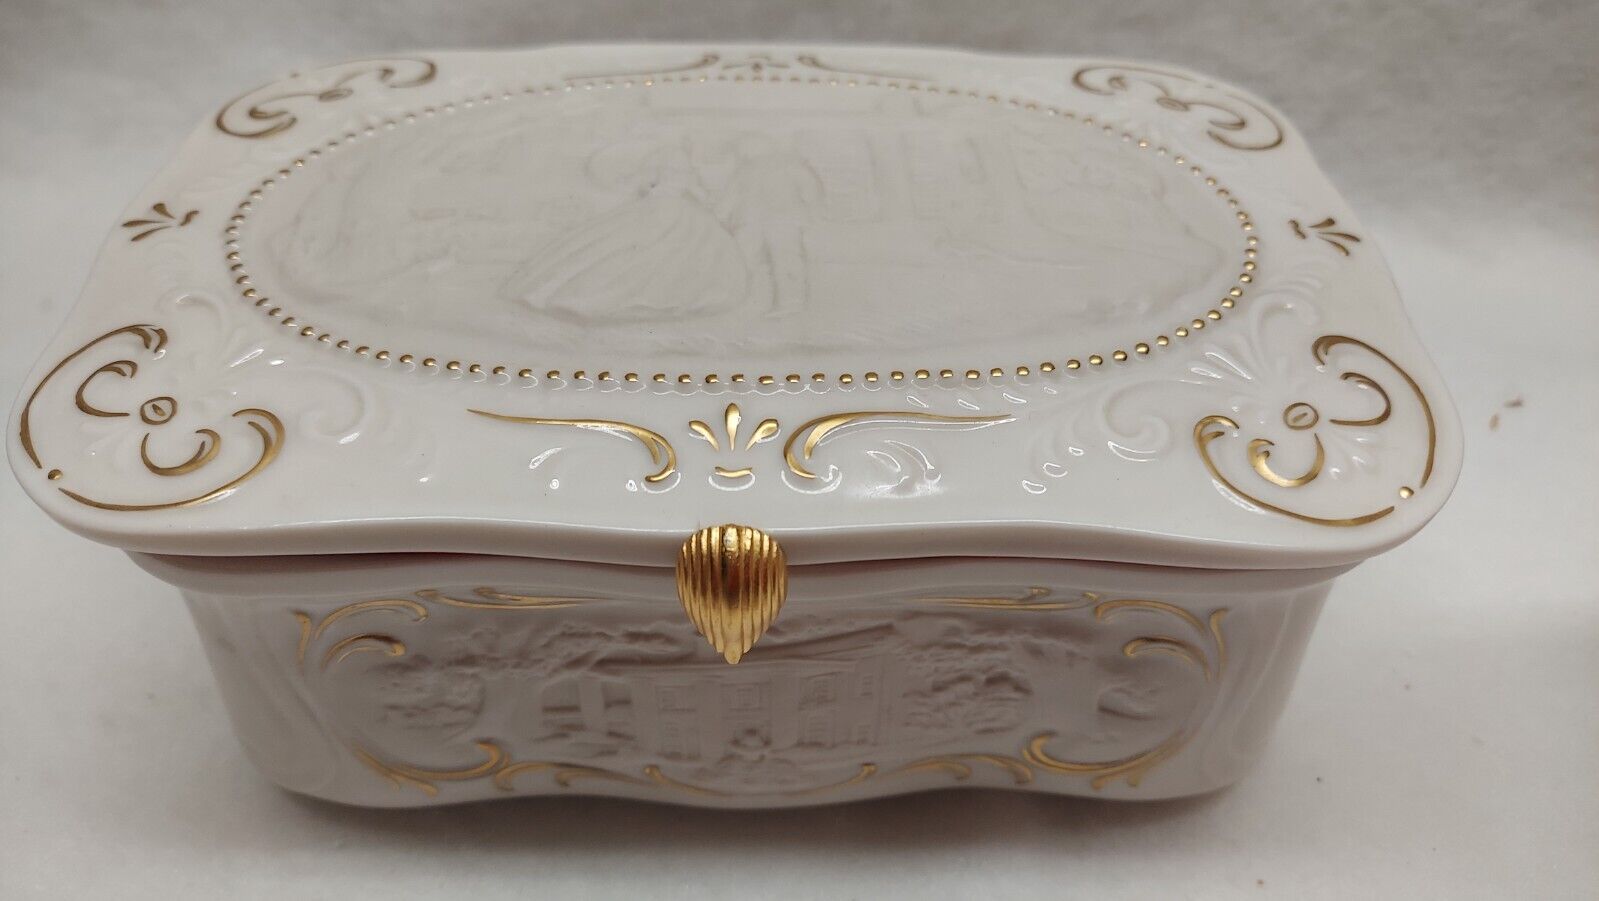 Vintage Porcelain Jewelry Music Box Gone with the Wind by Franklin Mint 1987